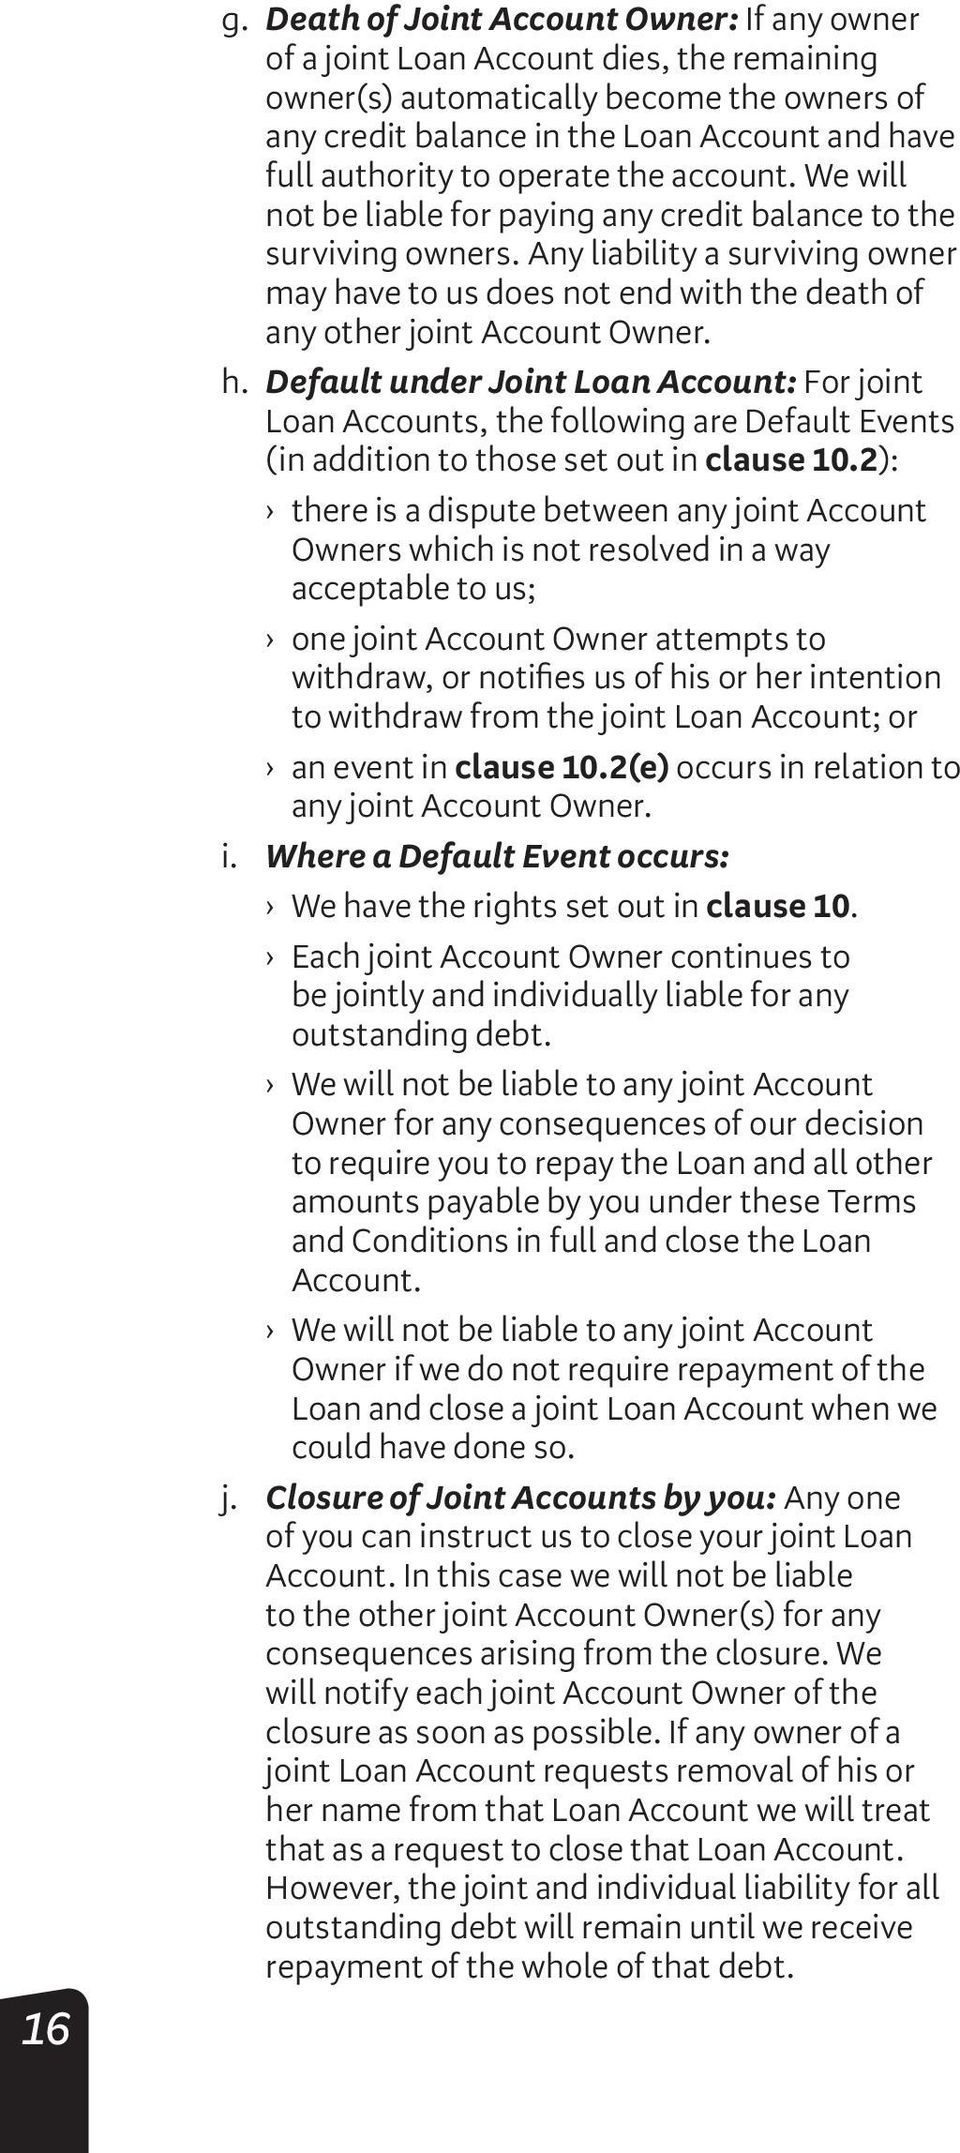 Any liability a surviving owner may have to us does not end with the death of any other joint Account Owner. h. Default under Joint Loan Account: For joint Loan Accounts, the following are Default Events (in addition to those set out in clause 10.